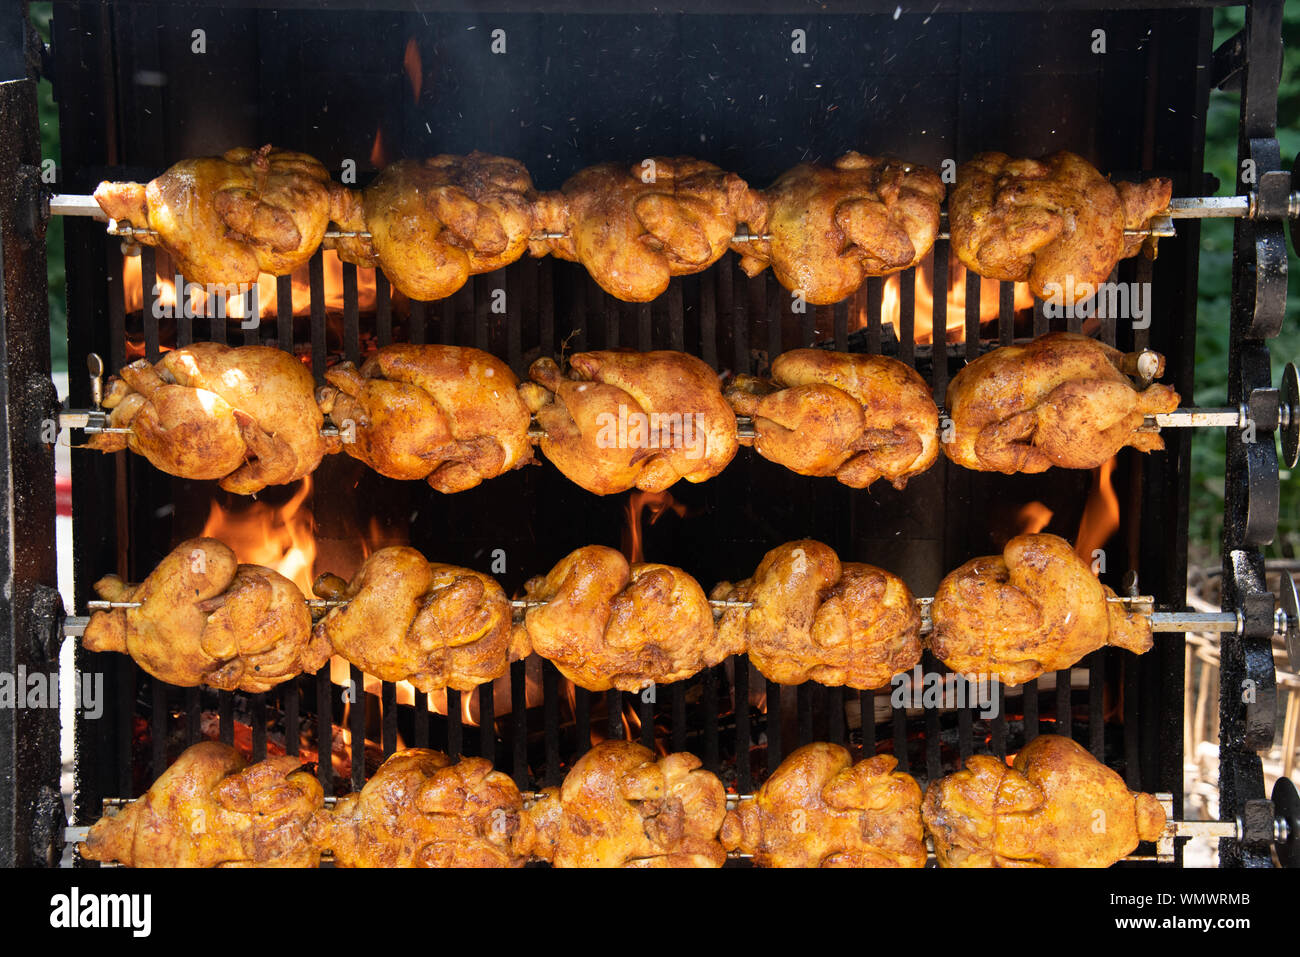 background of grilled chicken at the food market at a food truck with beautiful tasty chicken in front of a gas fire Stock Photo